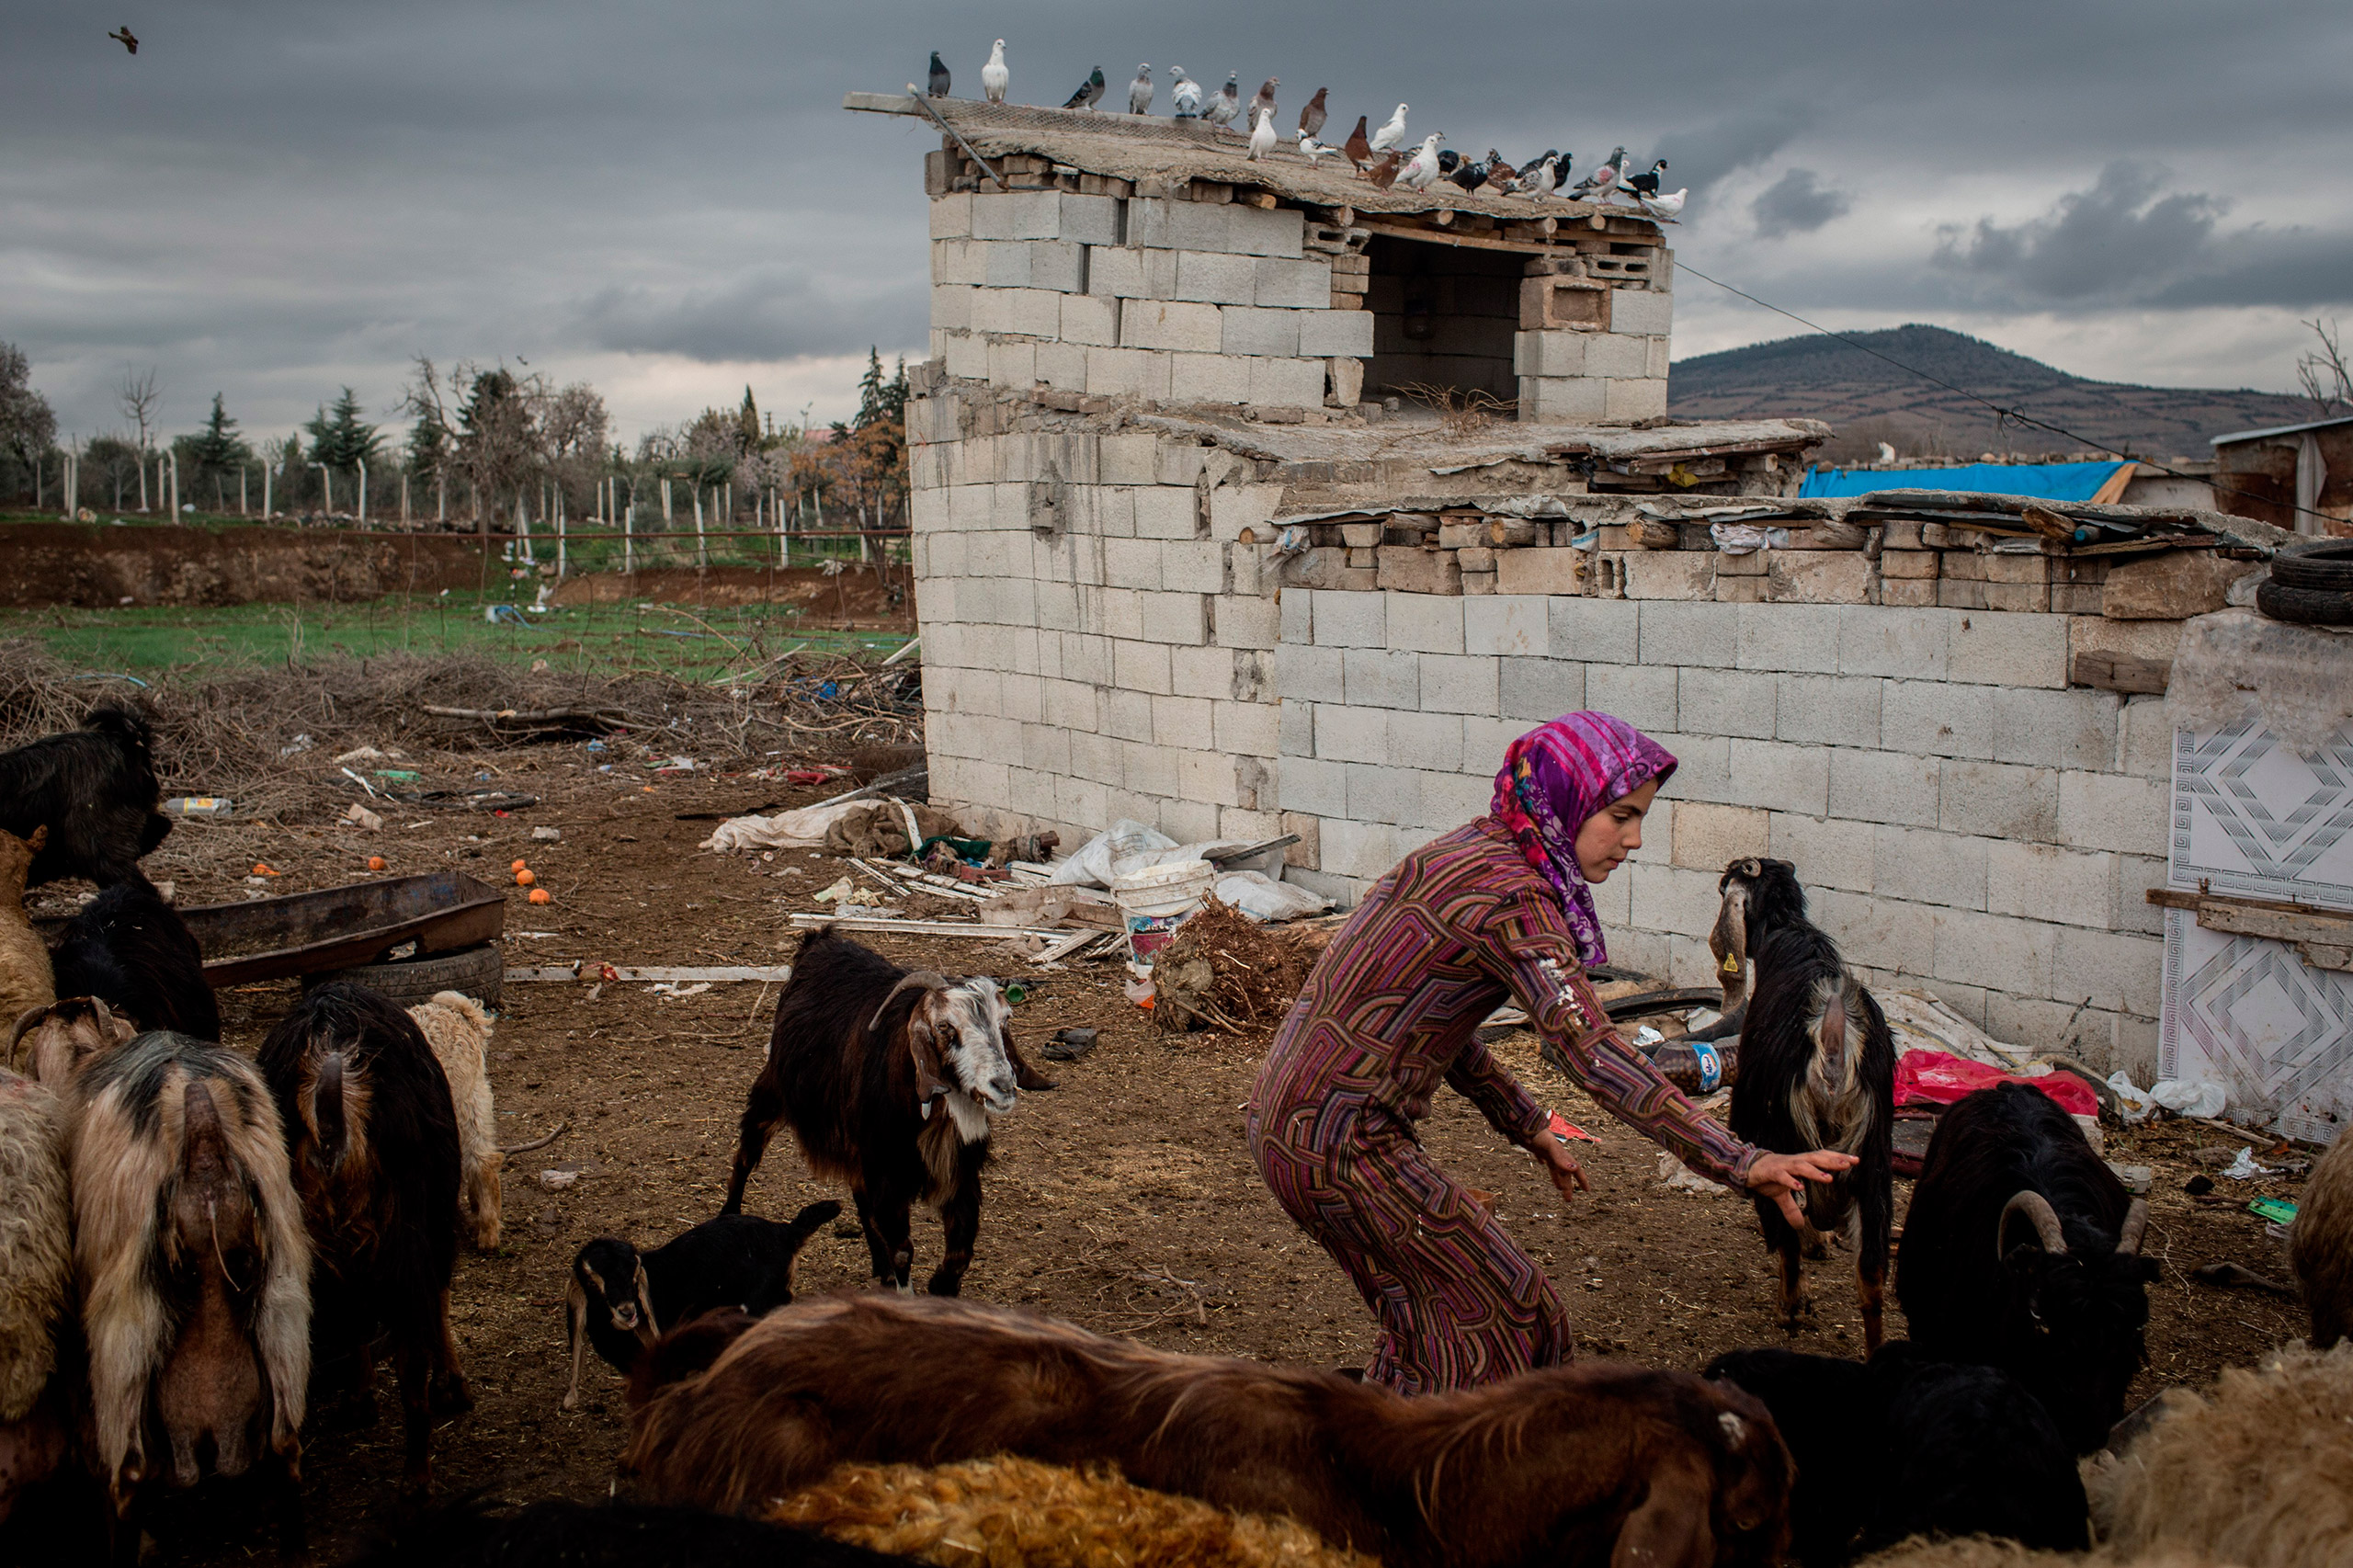 Yasmin, a Syrian refugee, tries to catch a goat during her work at a farm in Kilis, Turkey, March 3, 2016. (Chris McGrath—Getty Images)